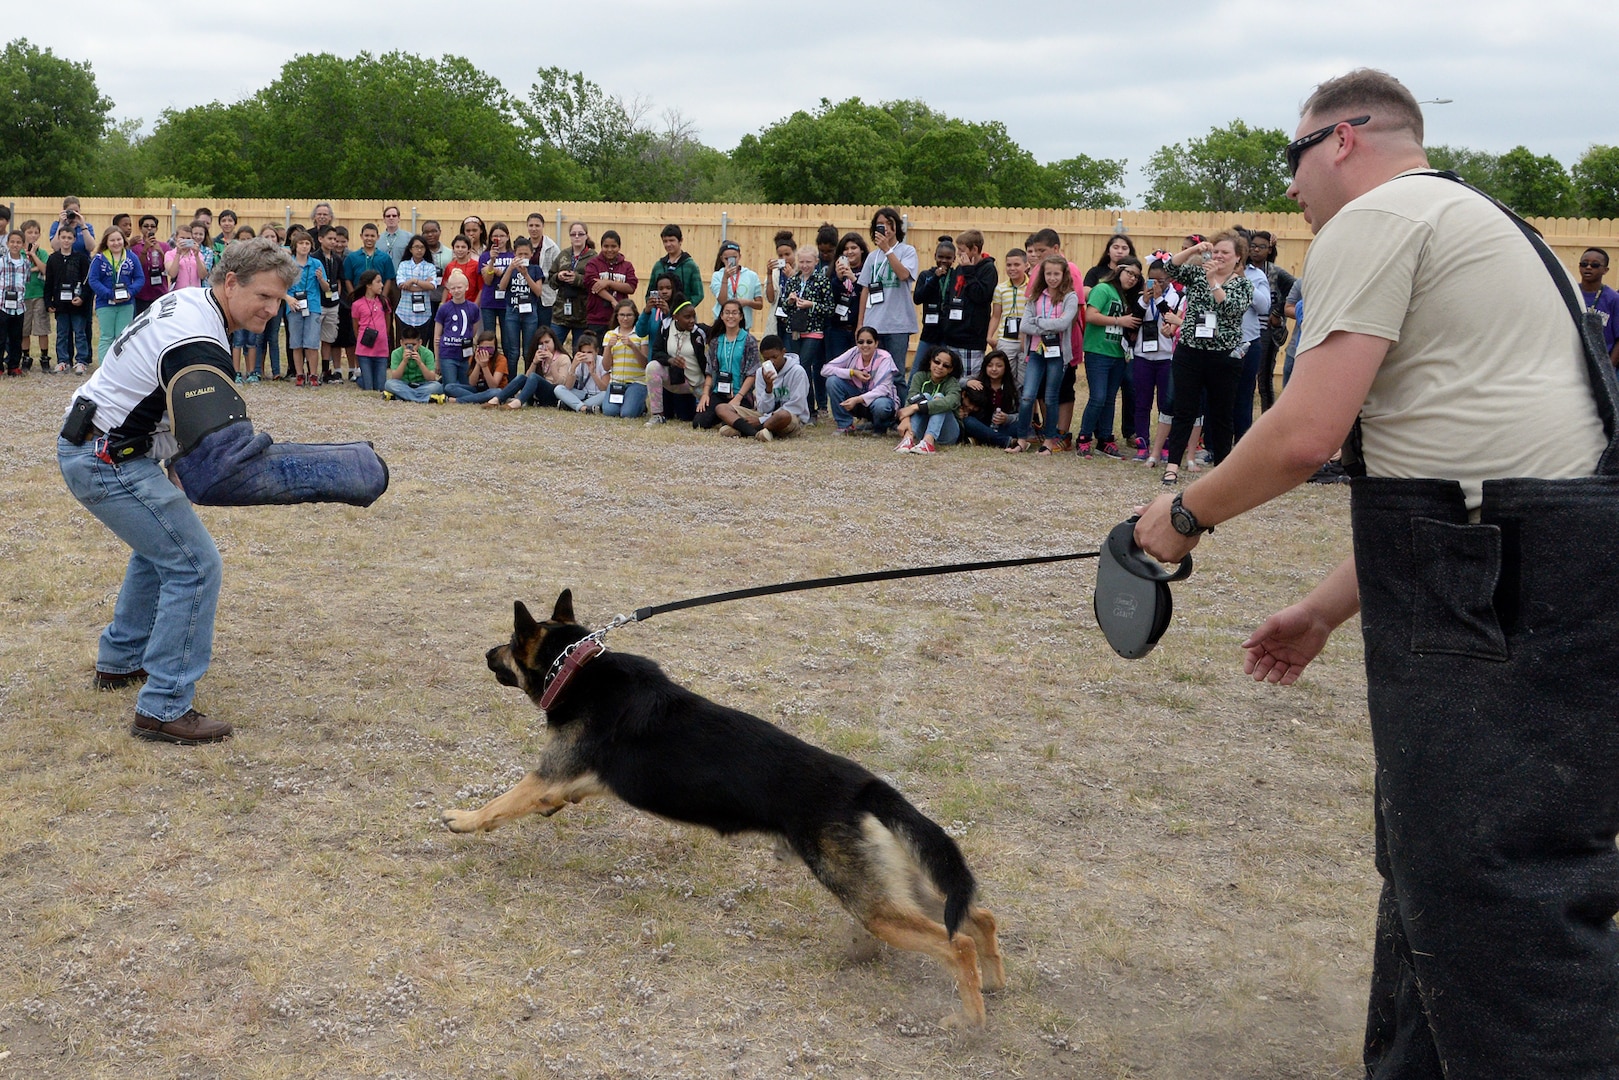 Air Force Staff Sgt. Johnathan Royce, 902nd Security Forces, commands Ramon, a military working dog, to attack Michael McFalls, Kitty Hawk Middle School Principal, as he simulates being a suspect during a demonstration for sixth graders May 6 at Kitty Hawk Middle School in Universal City, Texas. (U.S. Air Force photo by Johnny Saldivar)
